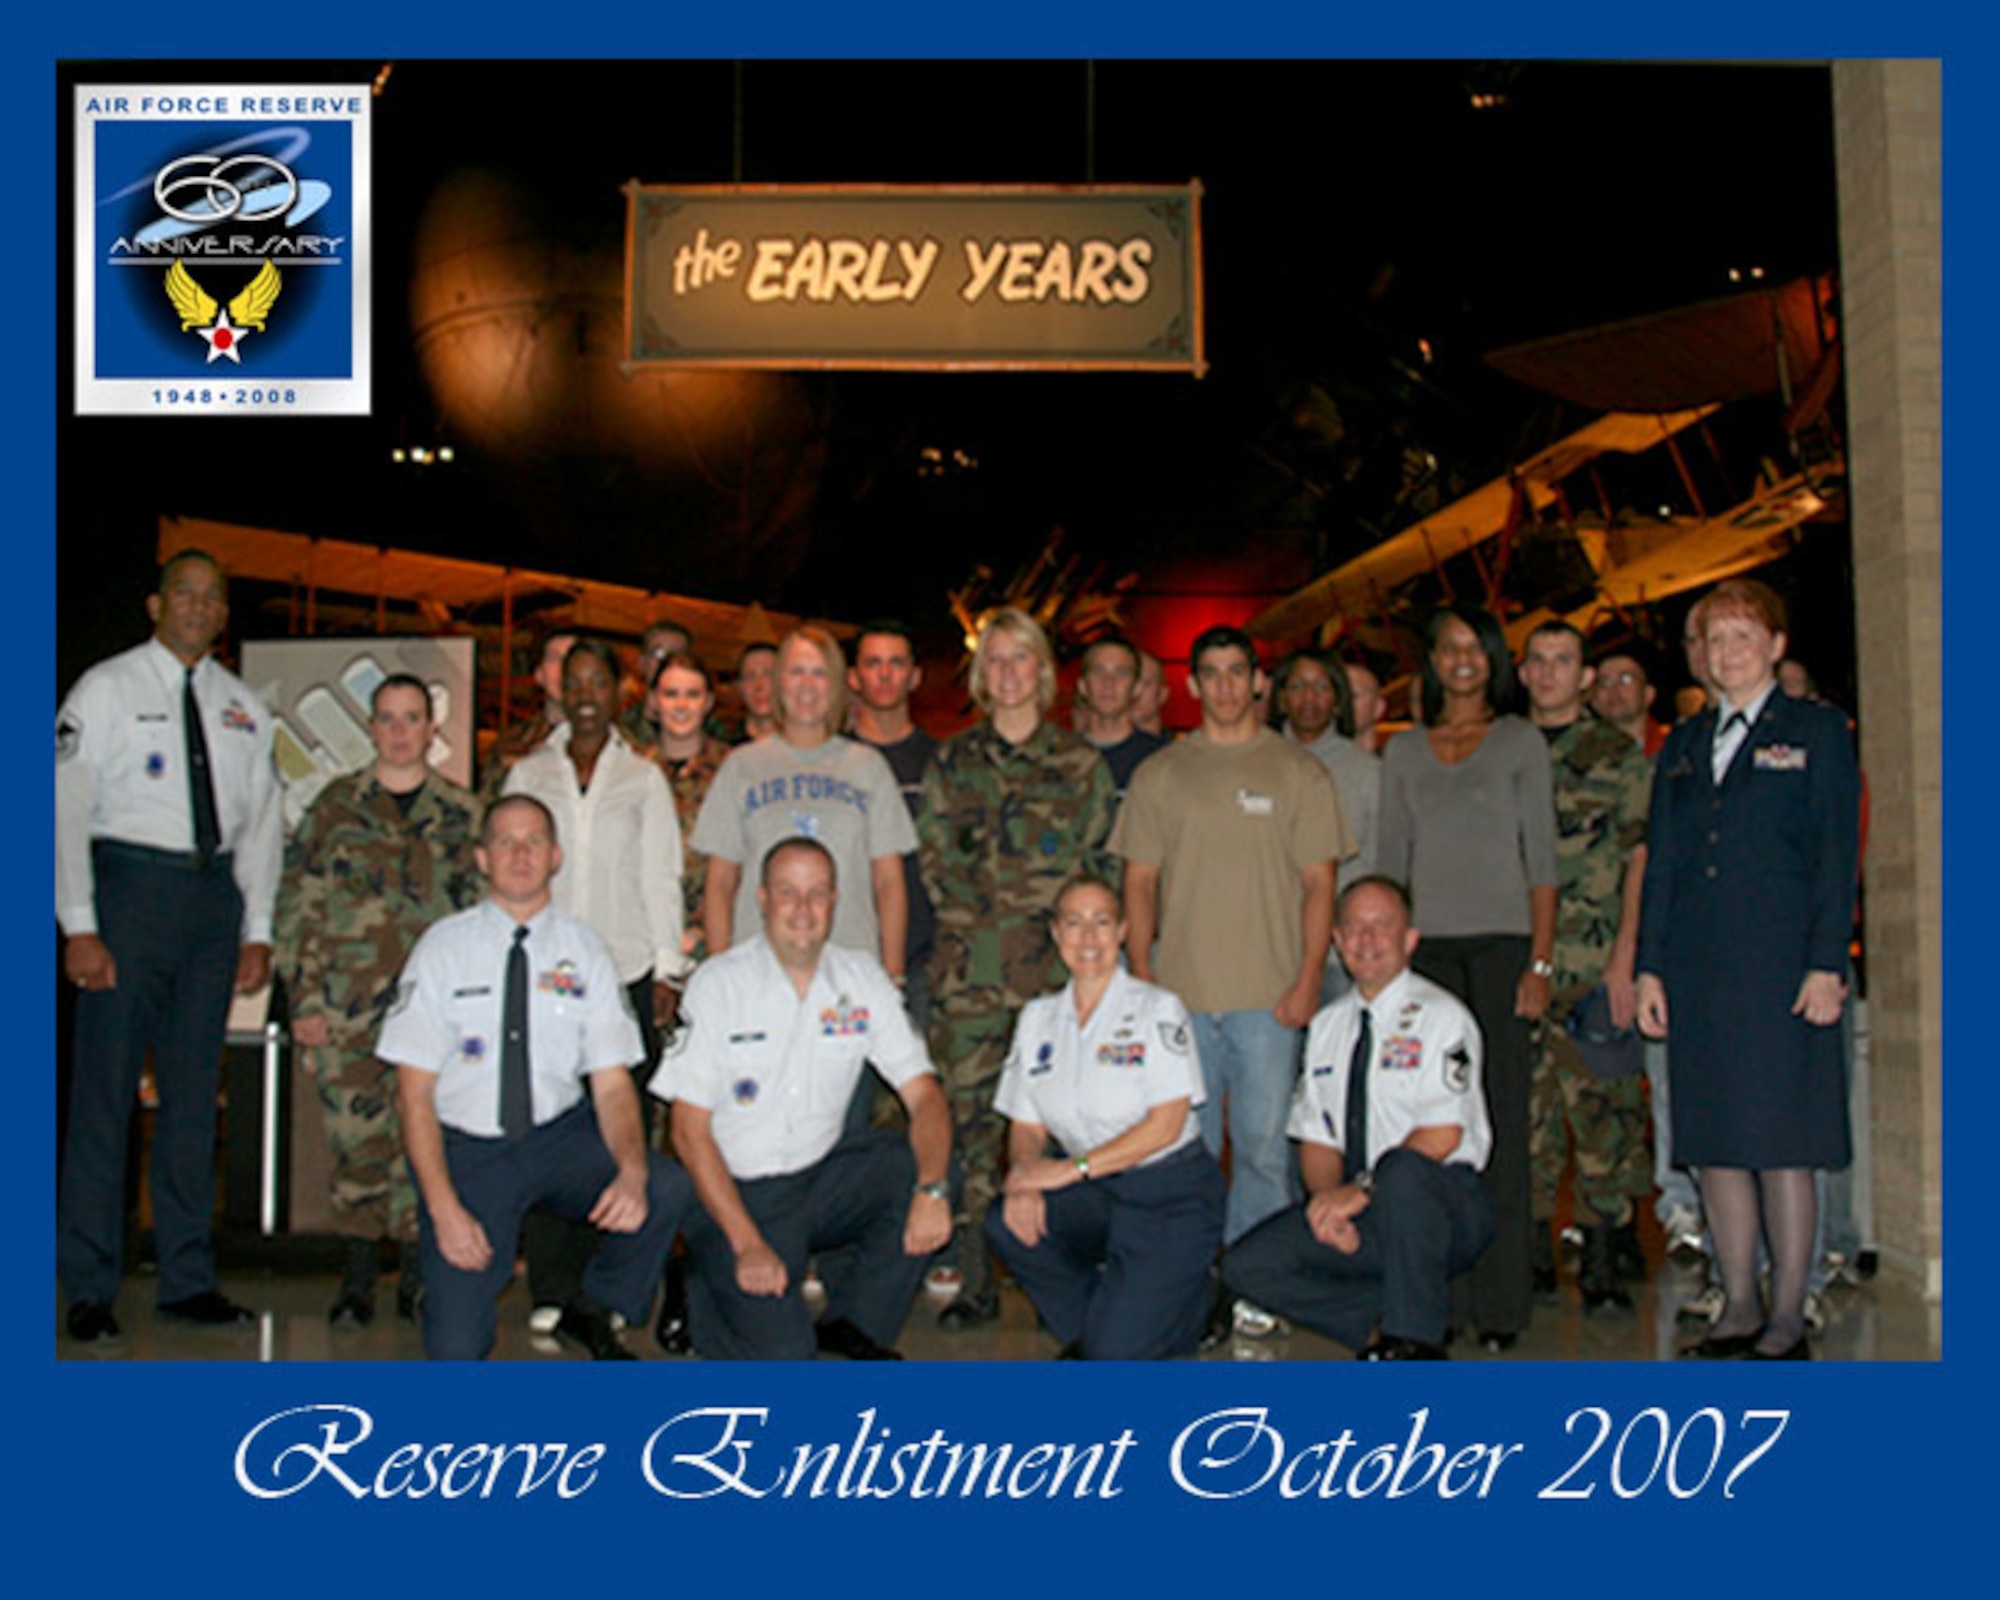 WRIGHT-PATTERSON AFB, Ohio -- Air Force Reserve recruiters along with Col. Mary Henderhan, commander of the 445th Mission Support Group (left) stands with 32 new recruits and enlistees for the 445th Airlift Wing in front of the early year’s exhibit inside the National Museum of the United States Air Force.  Colonel Henderhan did a mass enlistment for the recruiters October 13 to start the new fiscal year 2008 enlistment drive.  This was one of many events to highlight the U.S. Air Force Reserve Command's 60th Anniversary.  (U.S. Air Force photo/SrA Ken LaRock)